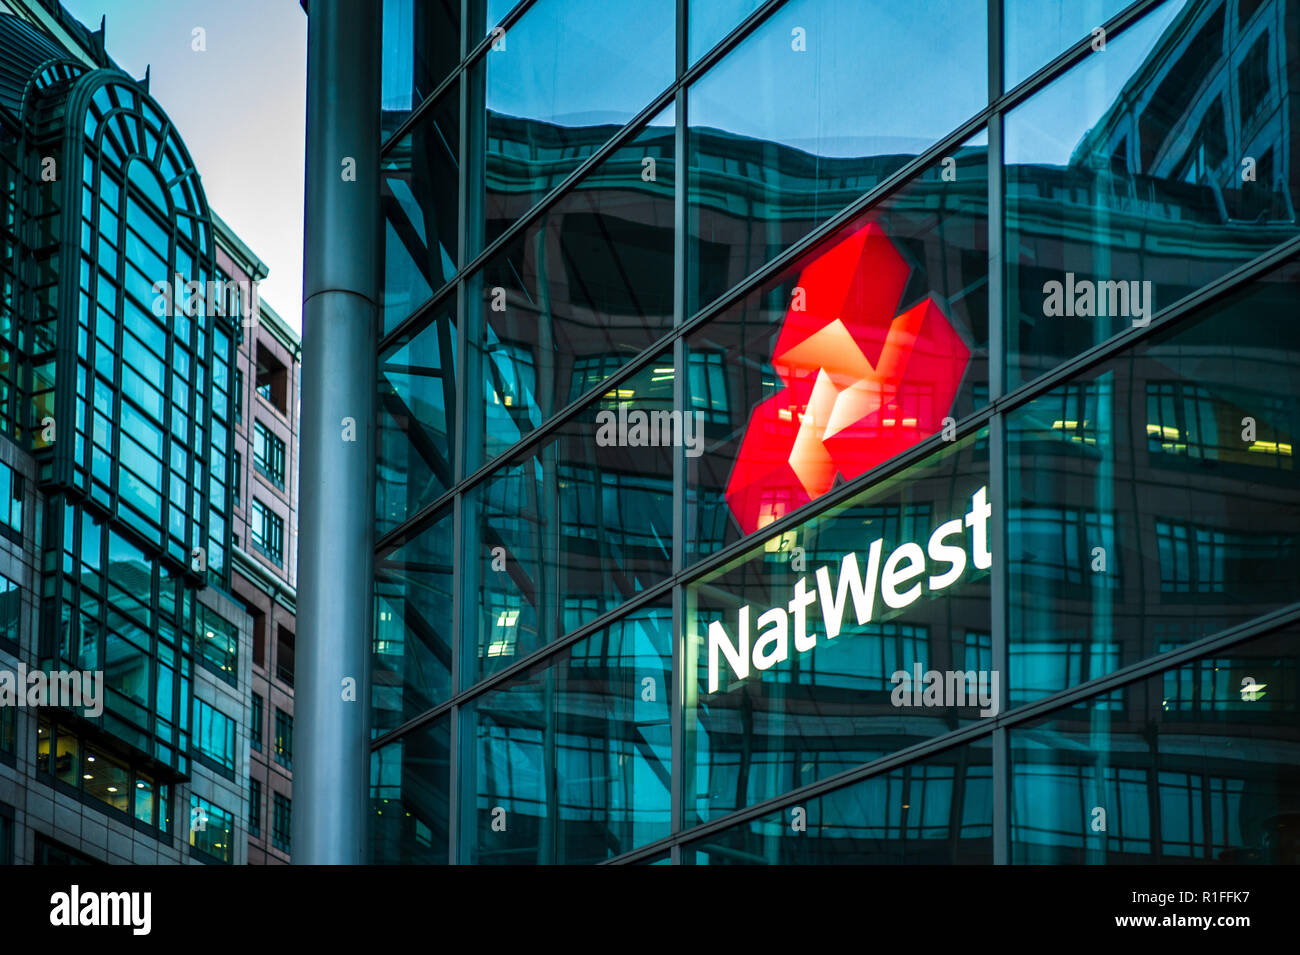 Natwest HQ London - Natwest Headquarters London at 250 Bishopsgate near Spitalfields in the City of London. The building was formerly branded RBS. Stock Photo